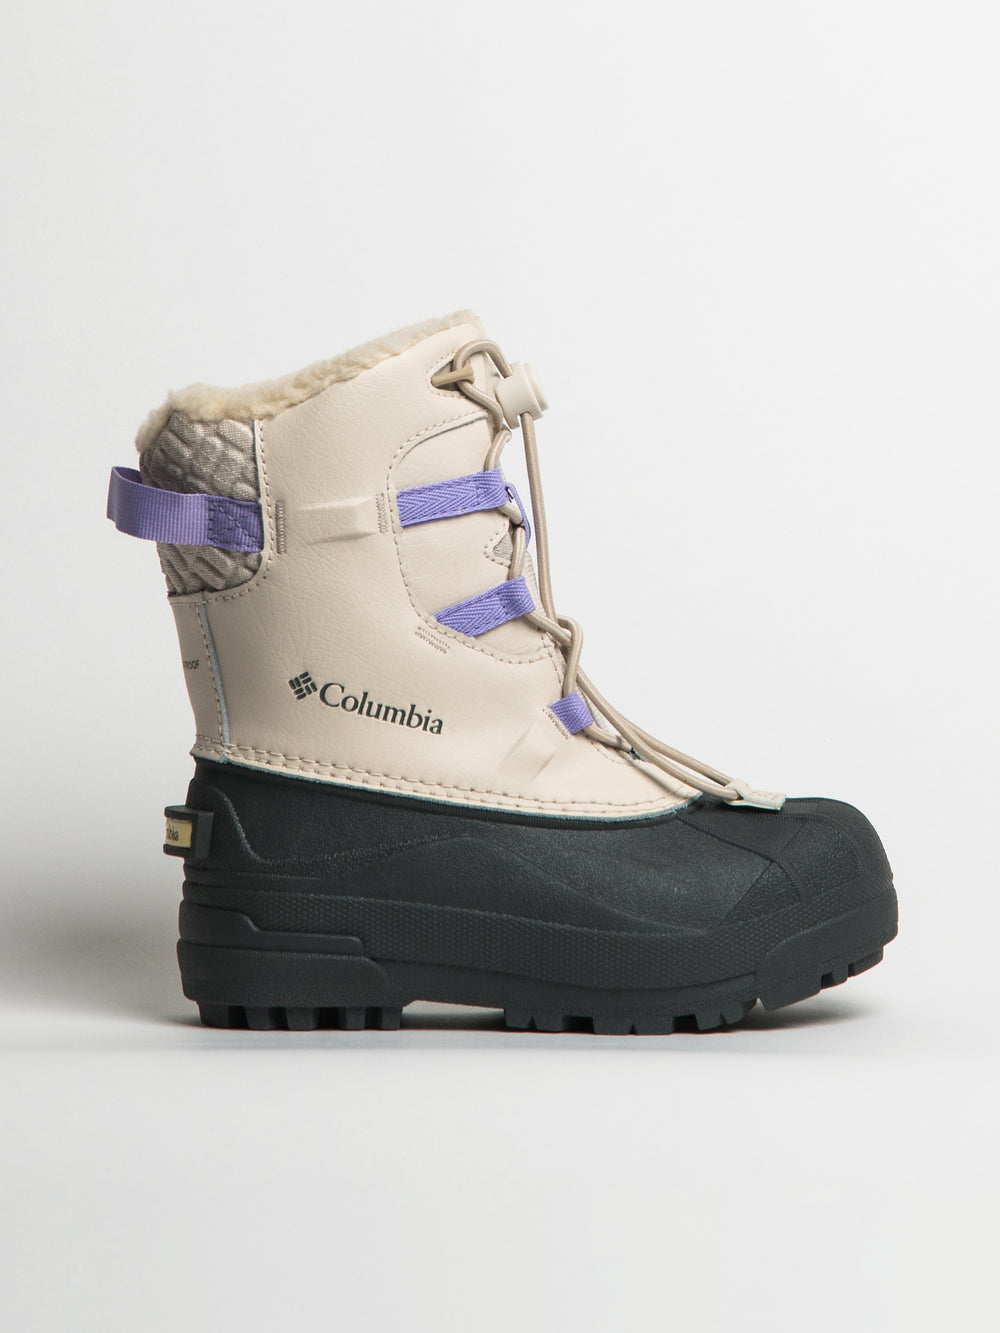 KIDS COLUMBIA CHILDRENS BUGABOOT CELSIUS BOOT